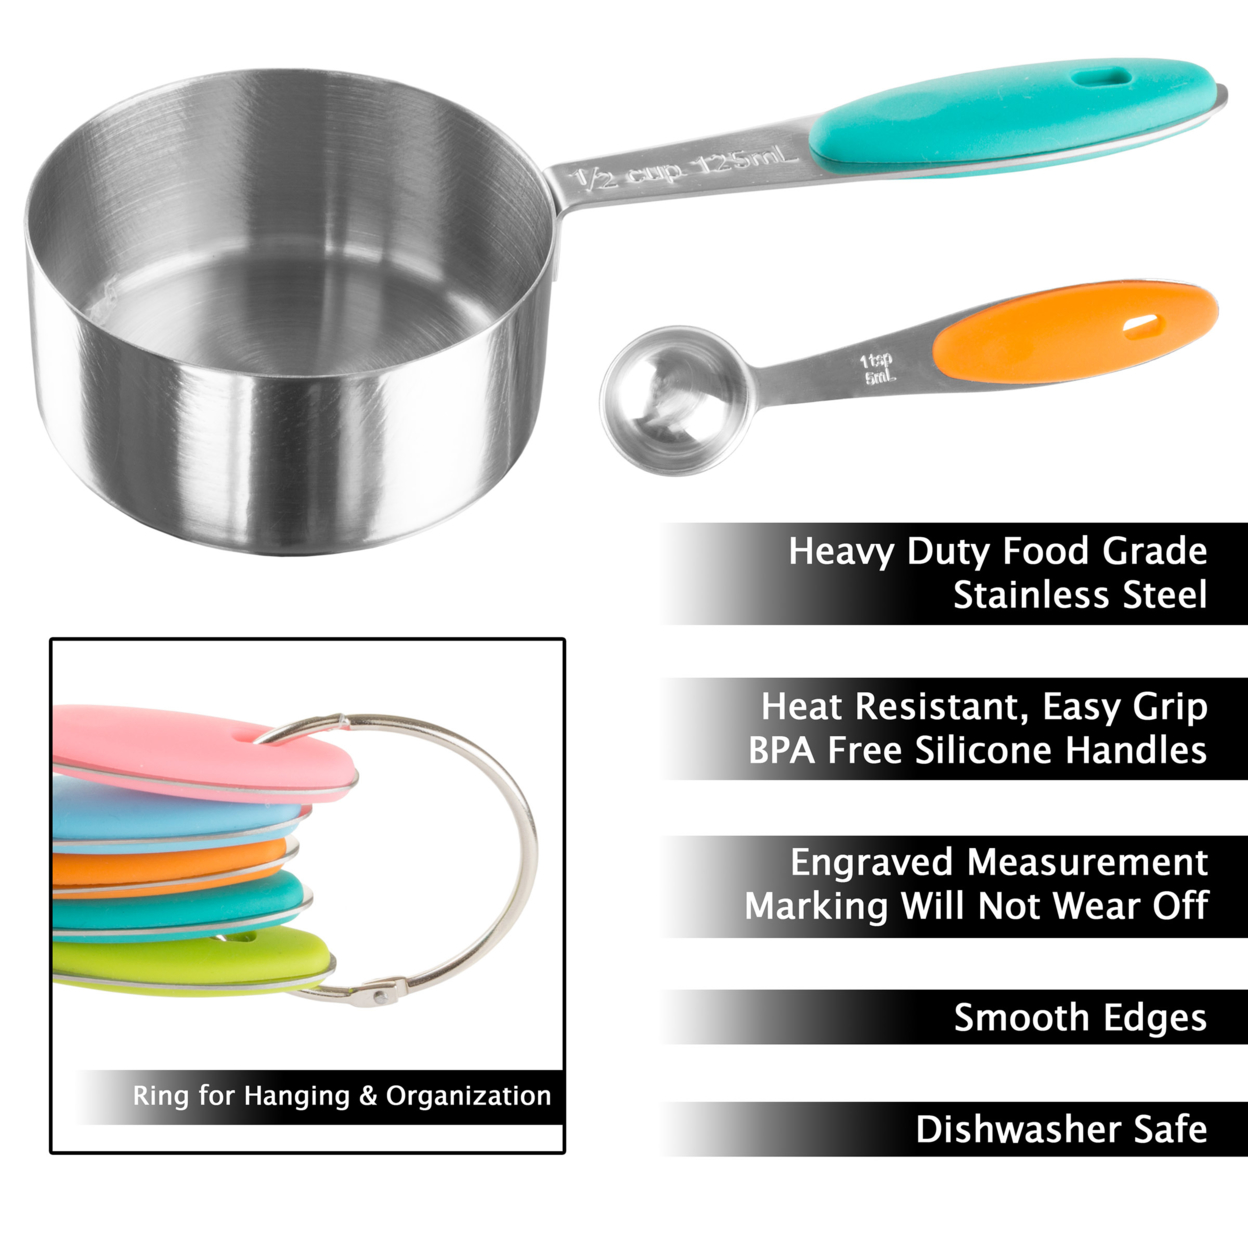 Measuring Cups And Spoons Matching Set Stainless Steel Silicone Handles Cups TBSP And Metric